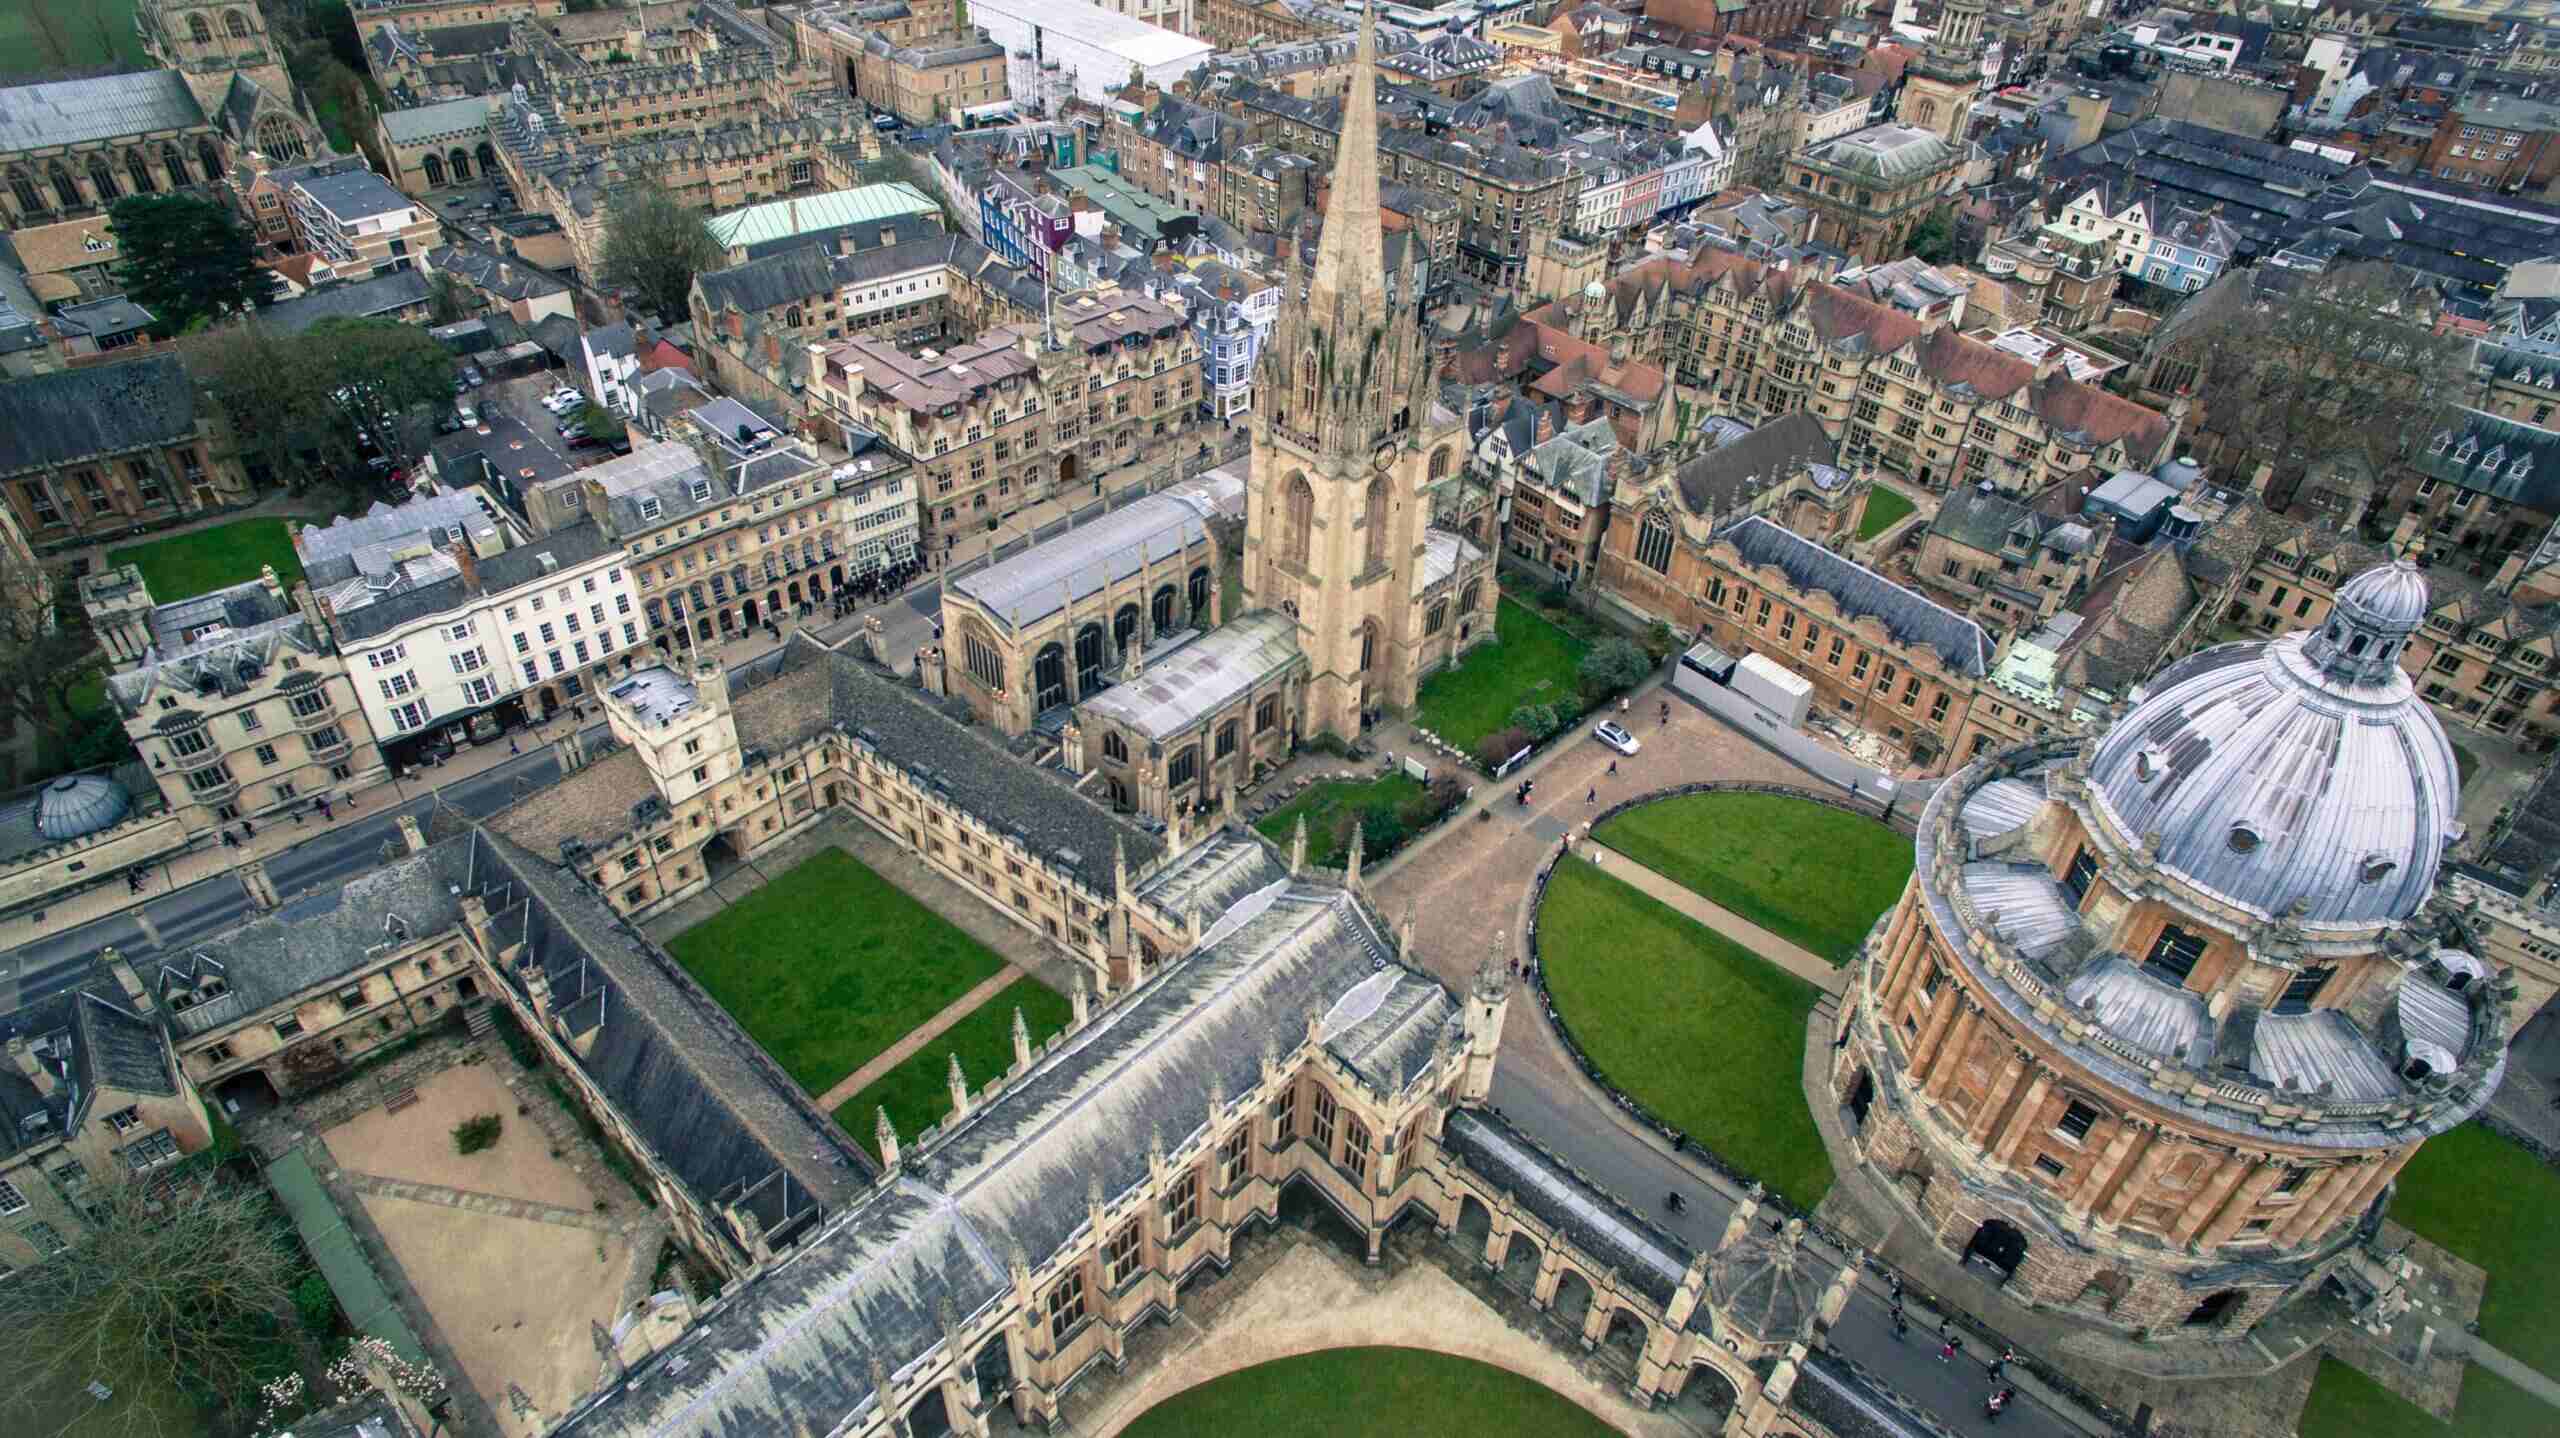 20-facts-about-oxford-university